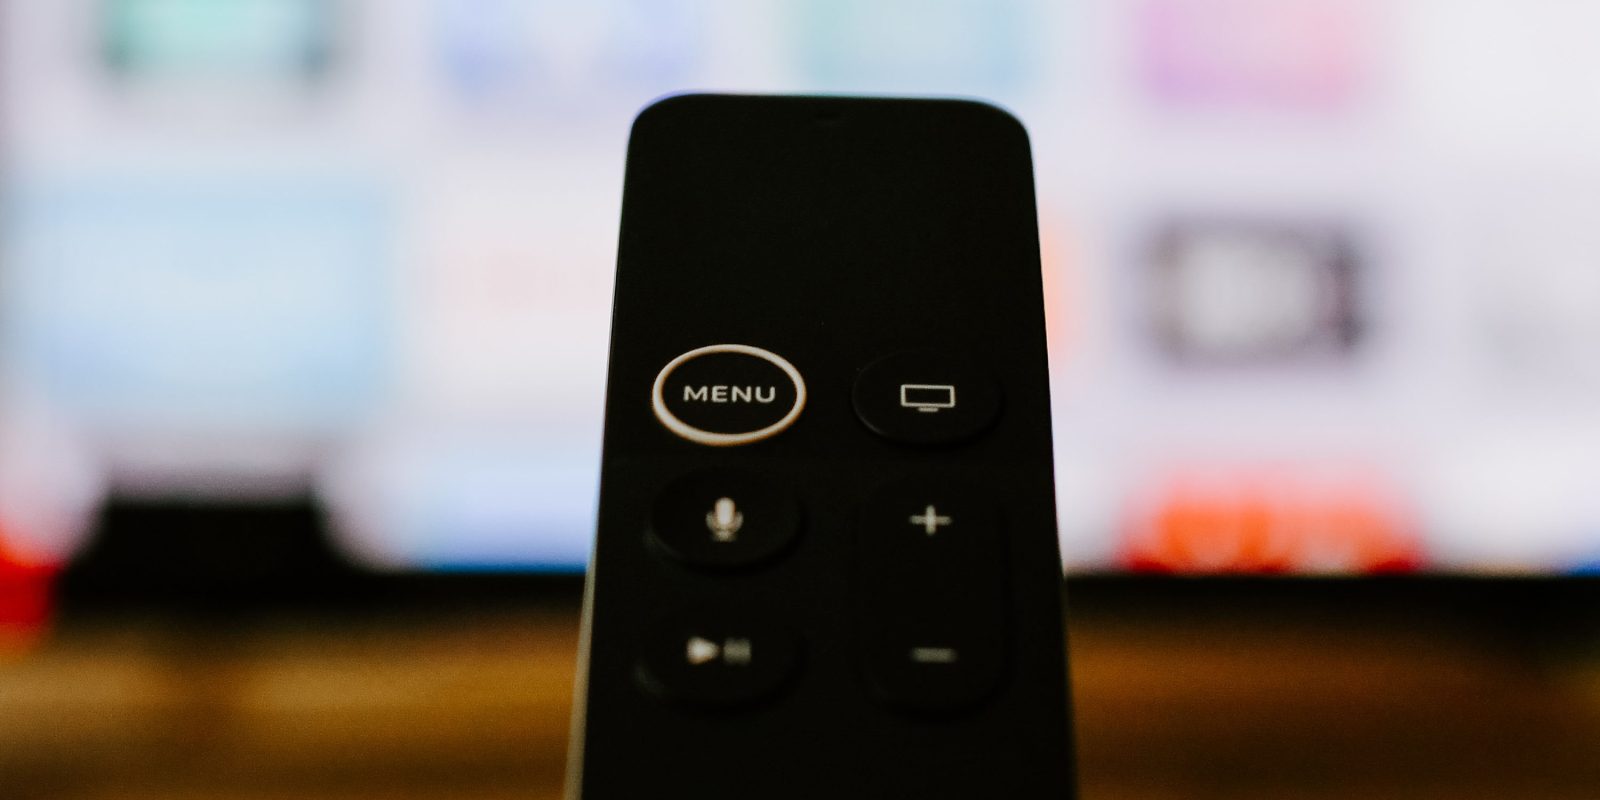 Apple TV remote in front of out-of-focus TV screen | Netflix has no USP, says analyst, against quality for Apple TV+